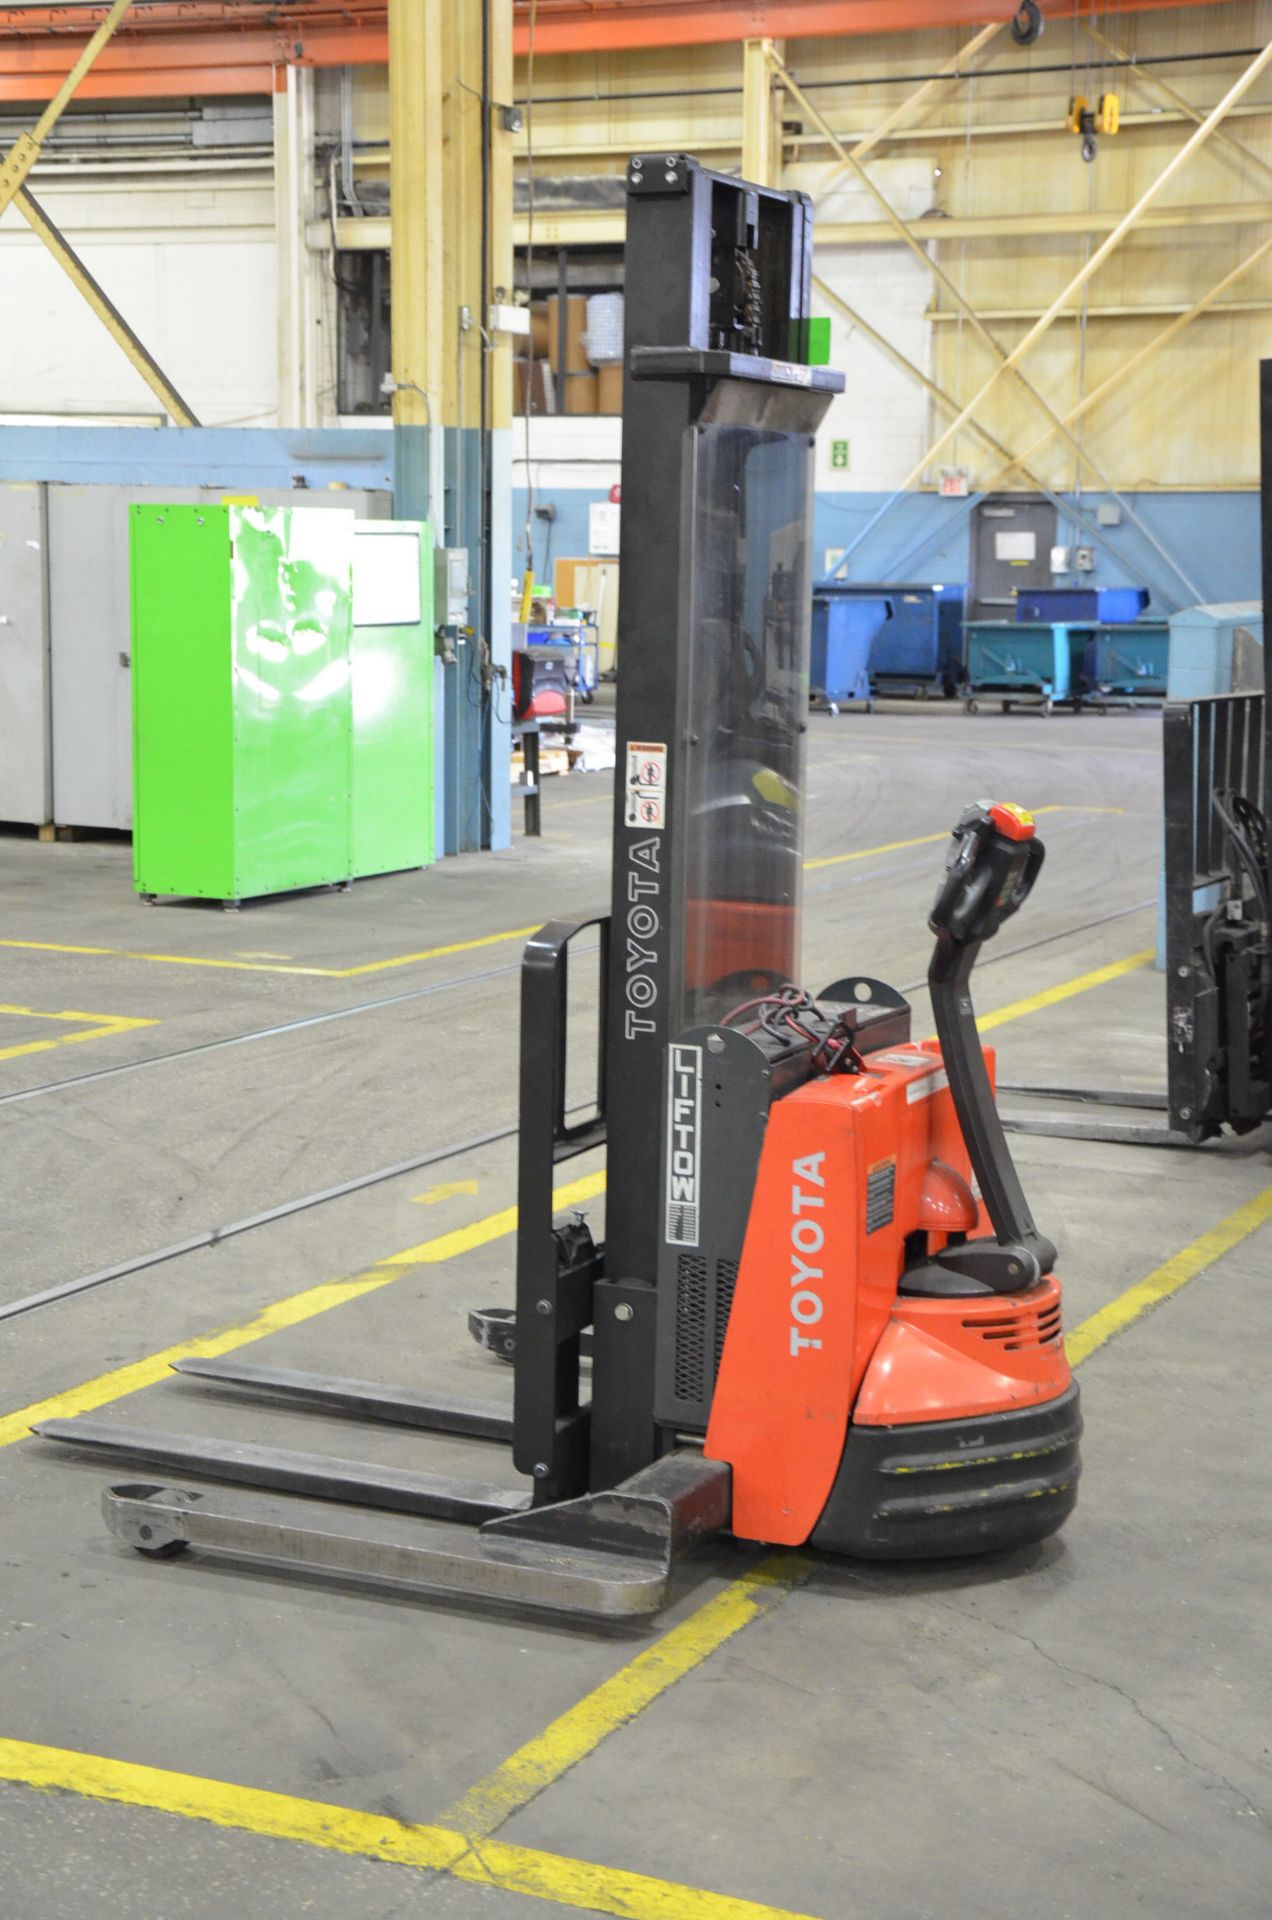 TOYOTA 7BWS13 24V 2500 LB. CAPACITY WALK-BEHIND ELECTRIC PALLET STACKER WITH 143" MAX. LIFT - Image 3 of 8